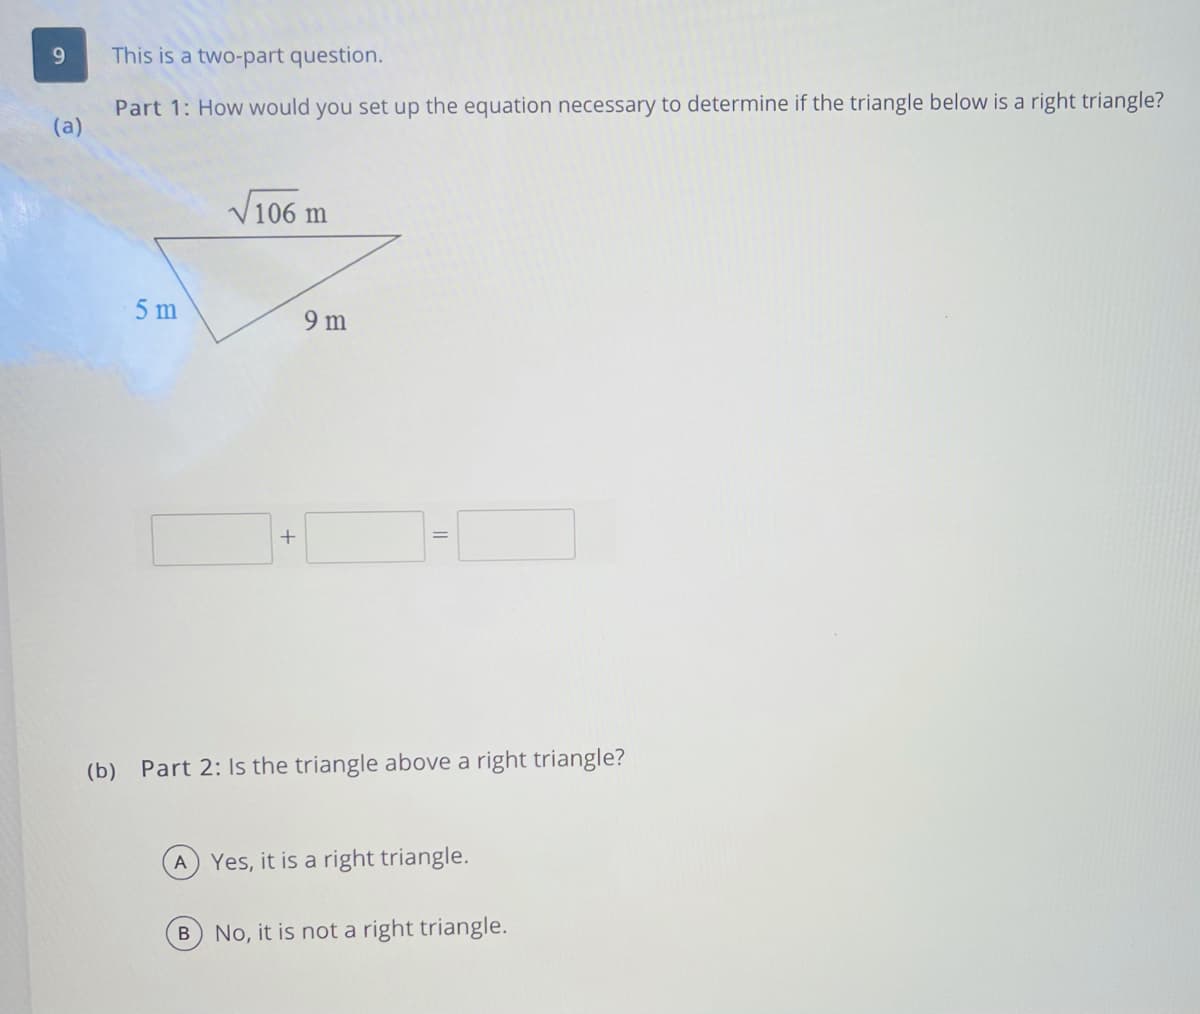 9.
This is a two-part question.
Part 1: How would you set up the equation necessary to determine if the triangle below is a right triangle?
(a)
V106 m
5 m
9 m
+
(b) Part 2: Is the triangle above a right triangle?
A
Yes, it is a right triangle.
No, it is not a right triangle.
